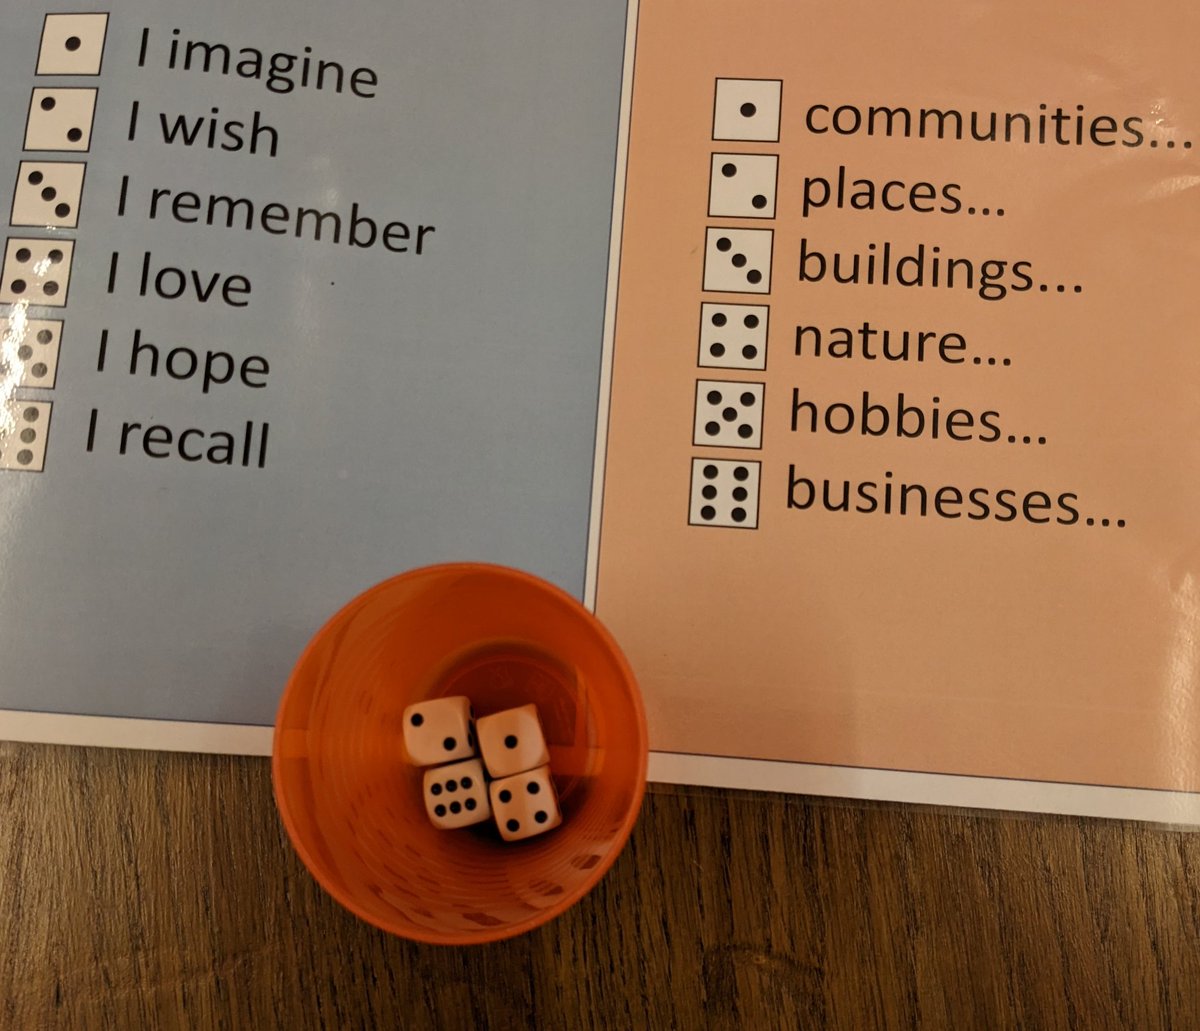 The dice rolling technique leads to some really interesting discussions about climate change e.g. 5 + 2 asks 'I hope places...' Or 6 + 5 'I recall hobbies...'